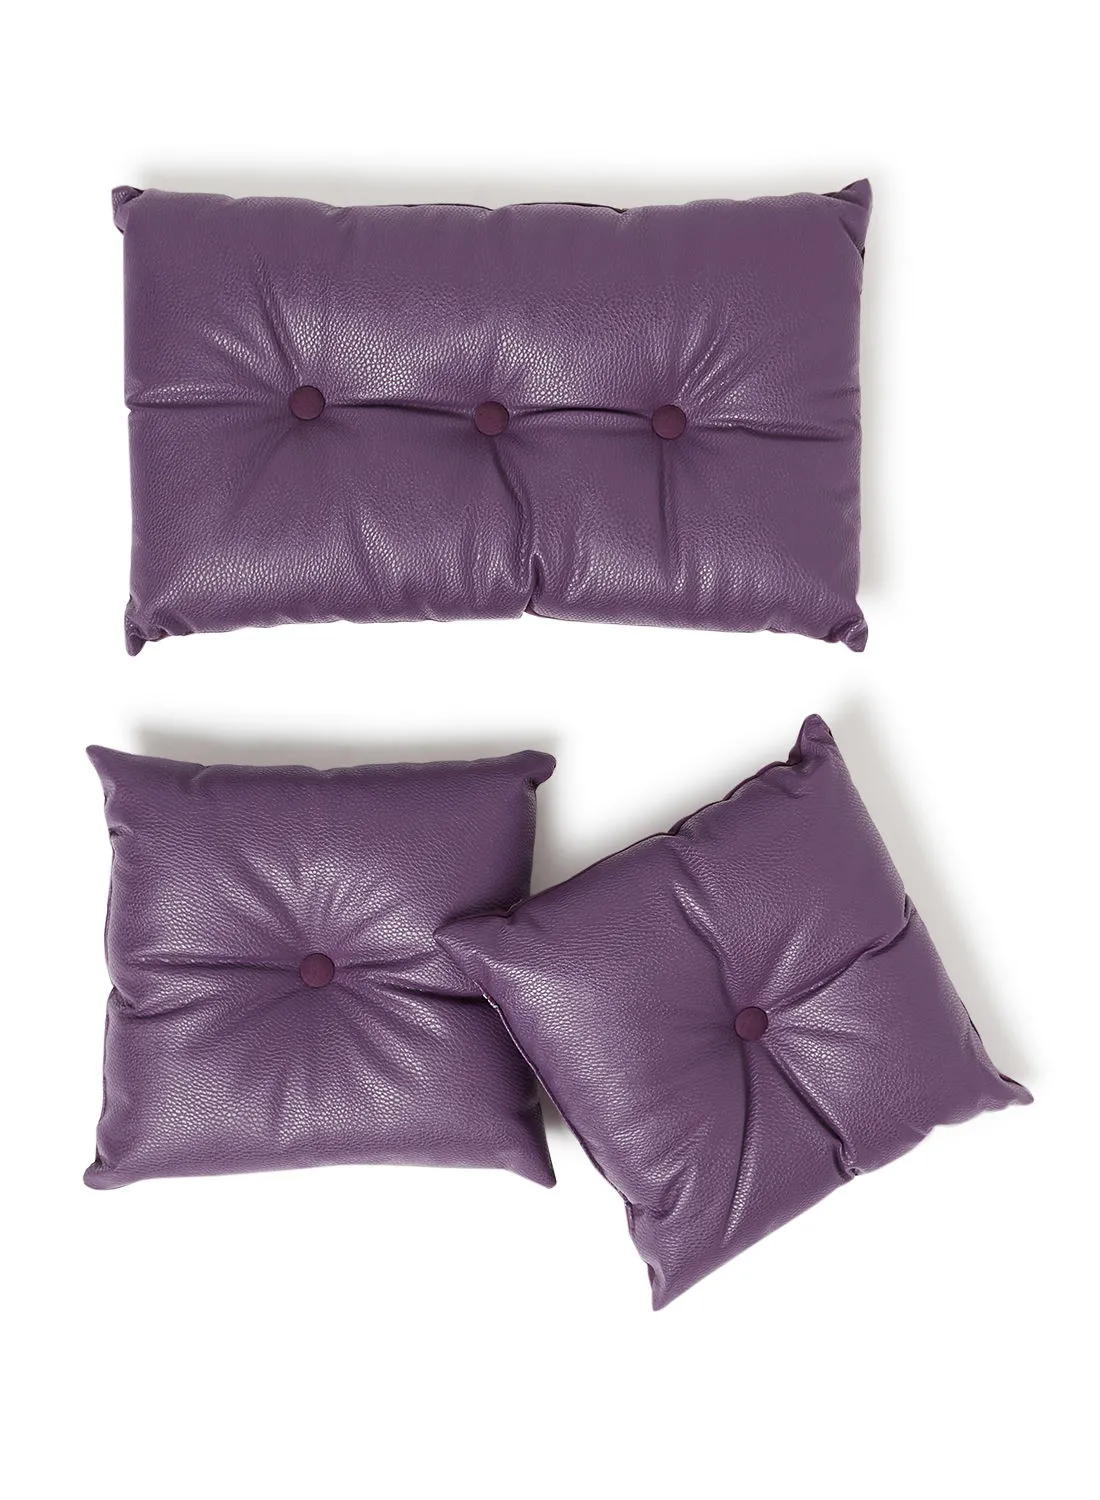 Hometown Decorative Cushion , Size Plum - 100% Polyester Bedroom Or Living Room Decoration